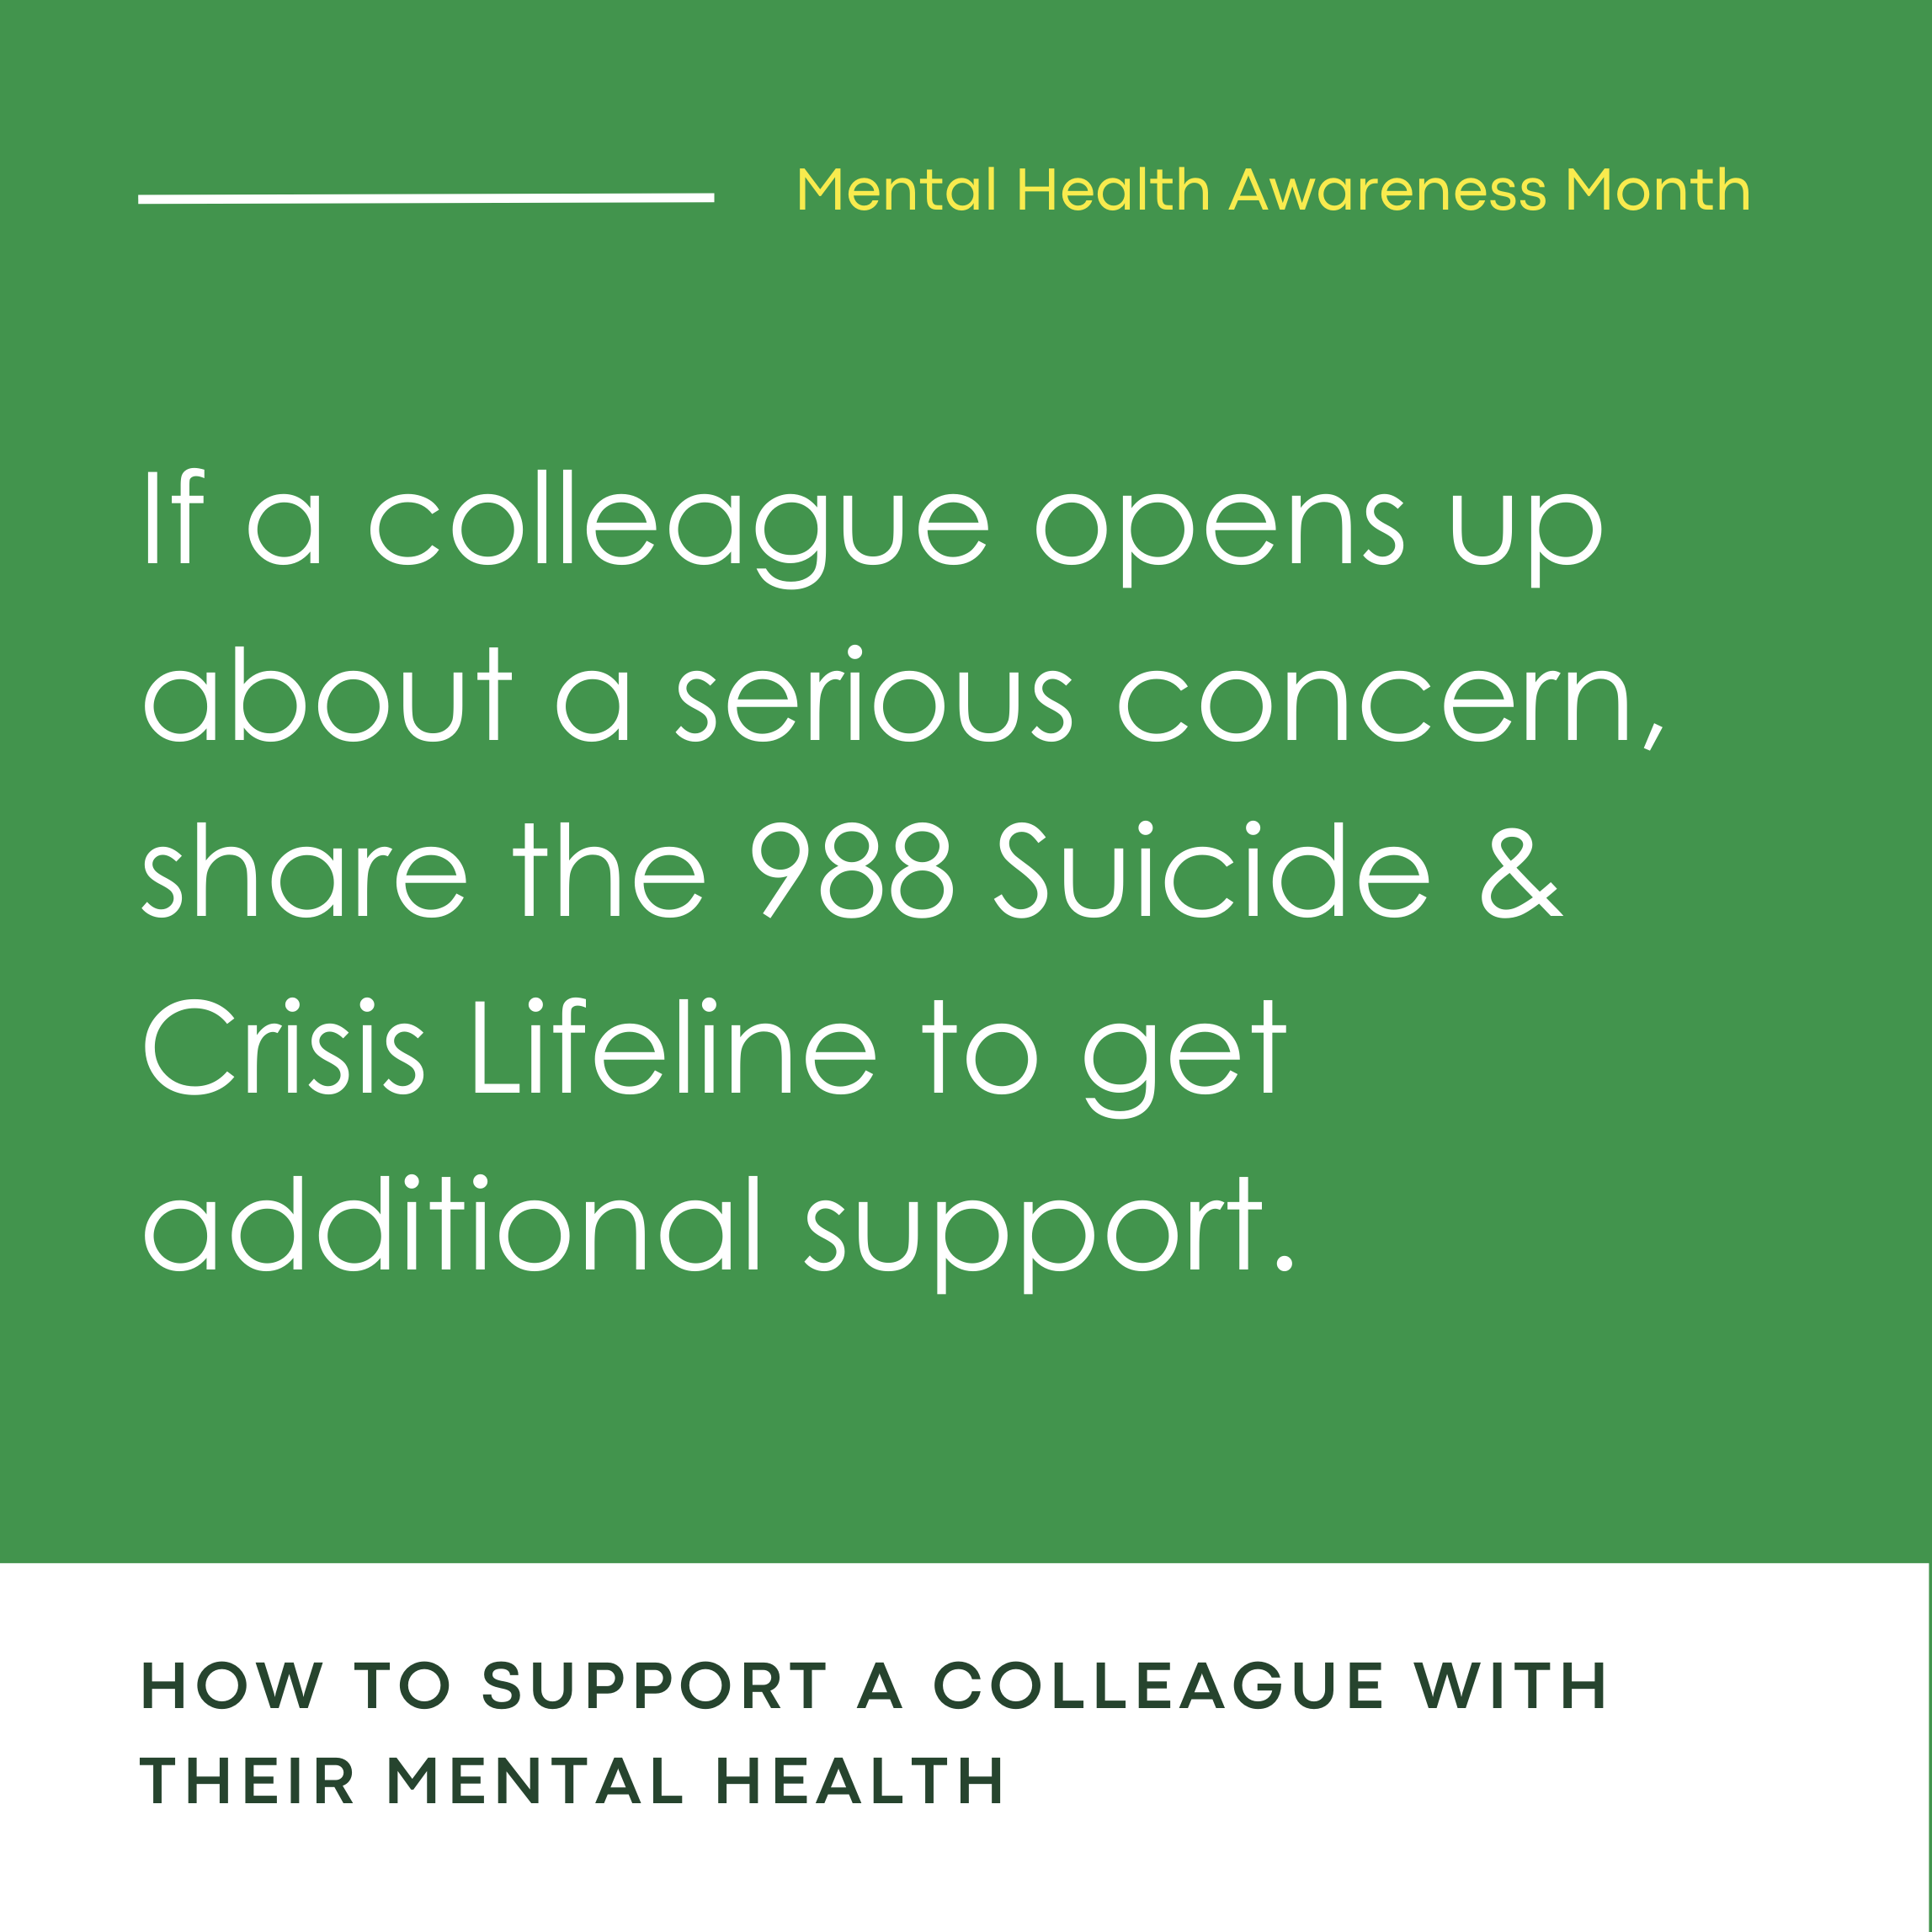 If a colleague opens up about a serious concern, share the 988 Suicide & Crisis Lifeline to get additional support